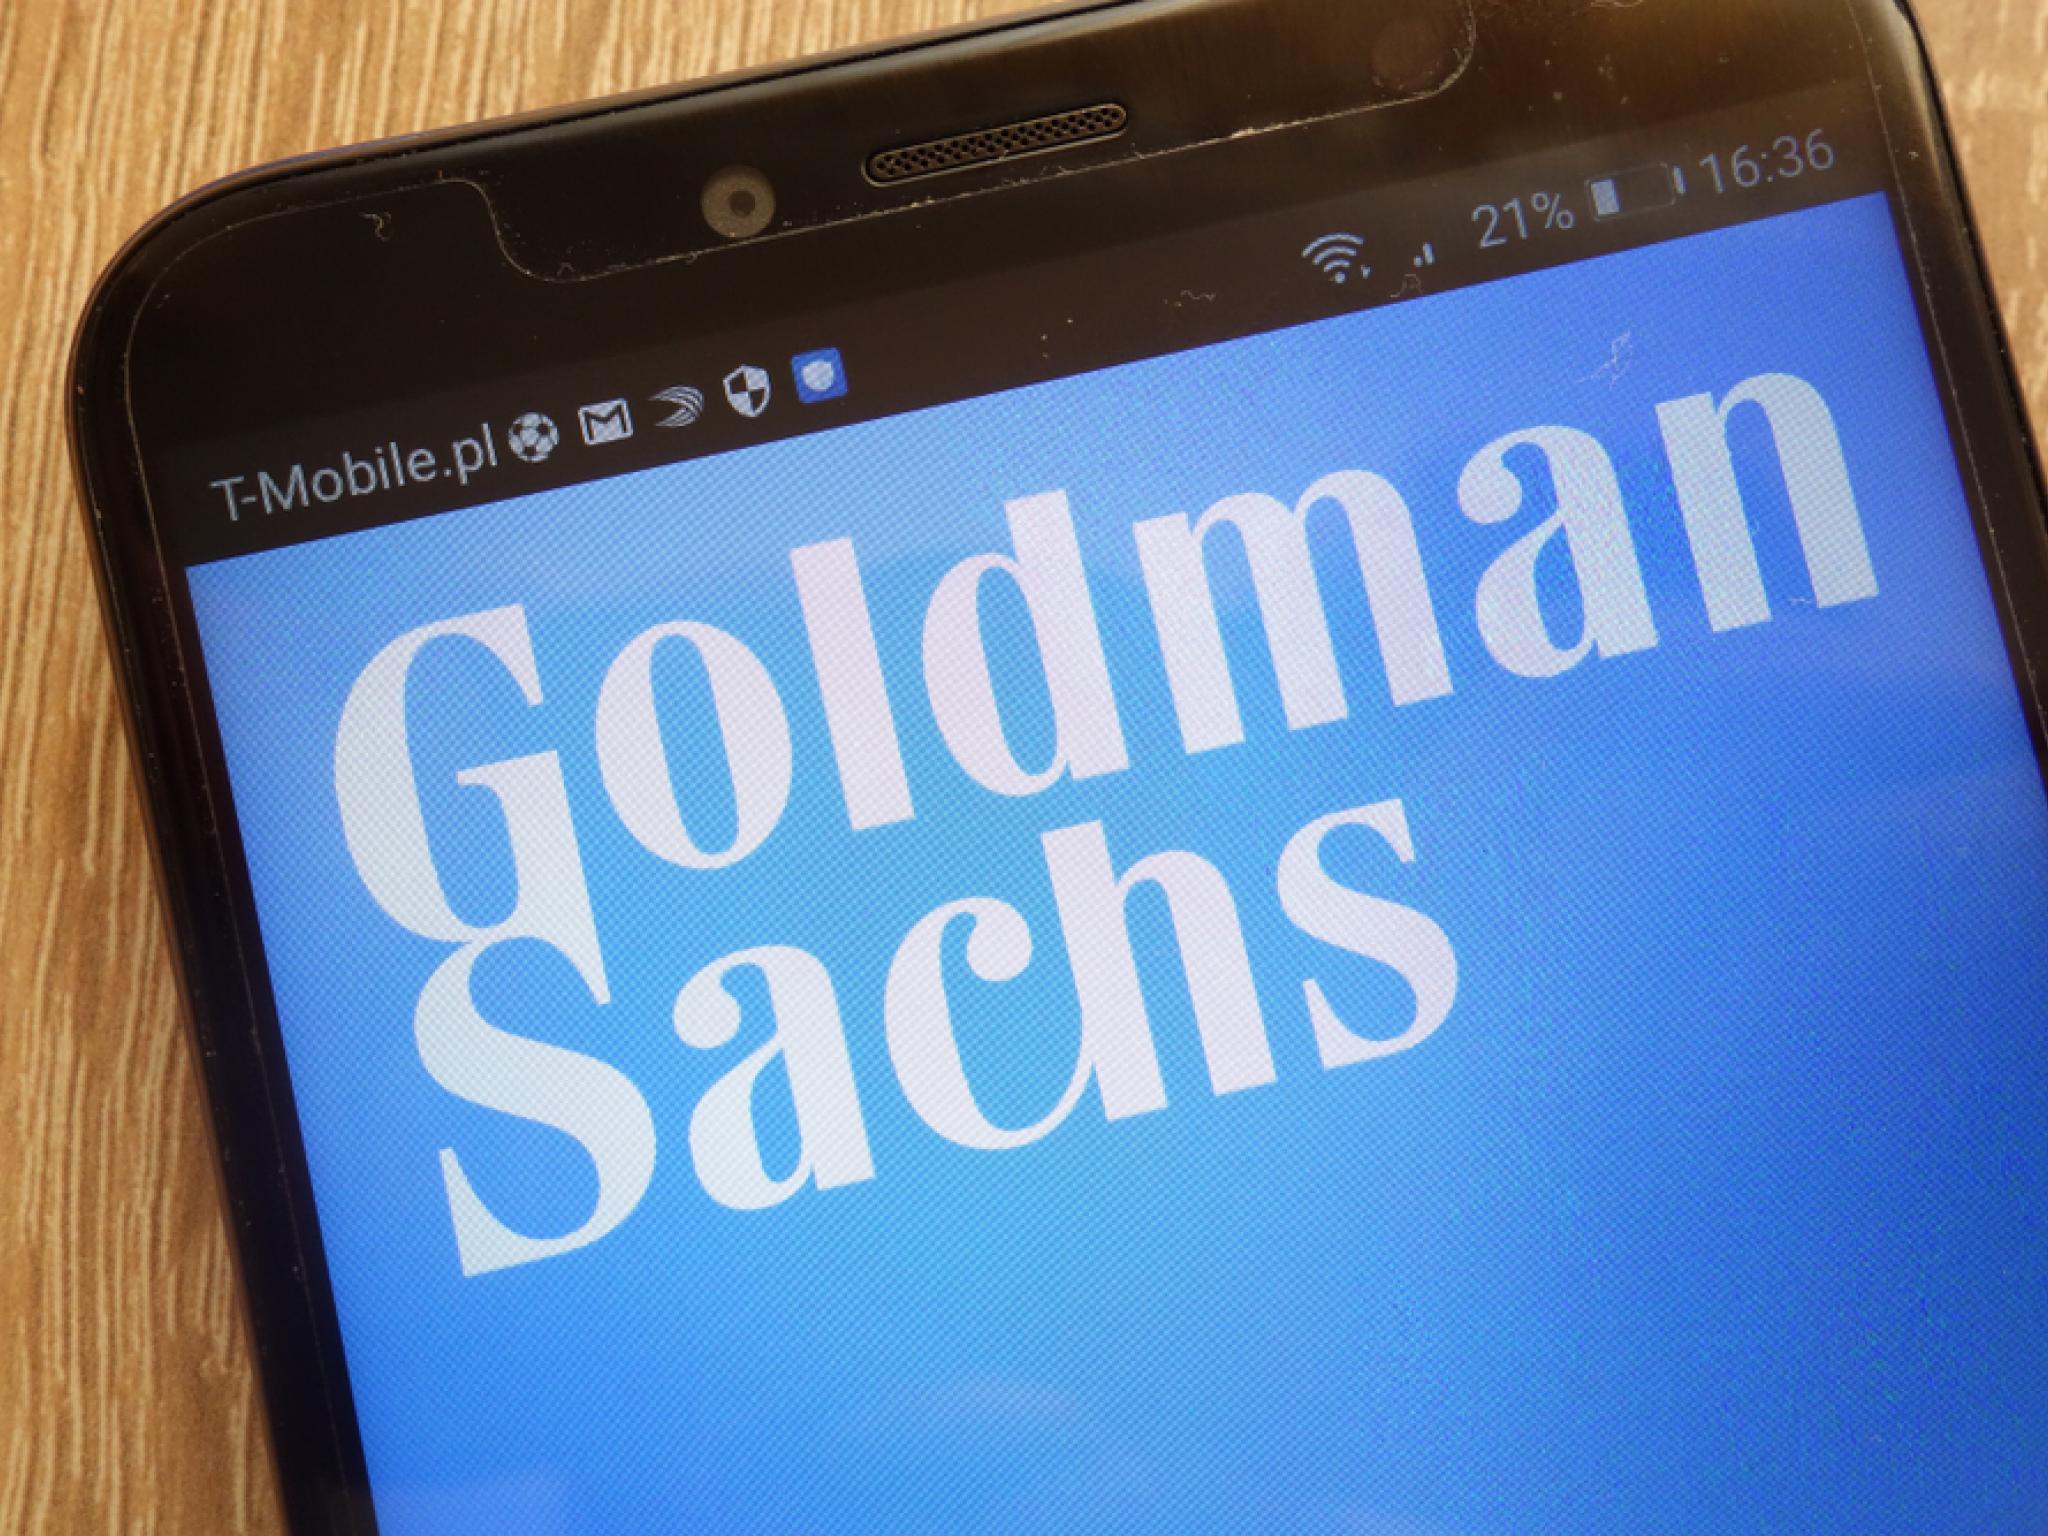  goldman-sachs-has-potential-for-significant-alpha-generation-analyst 